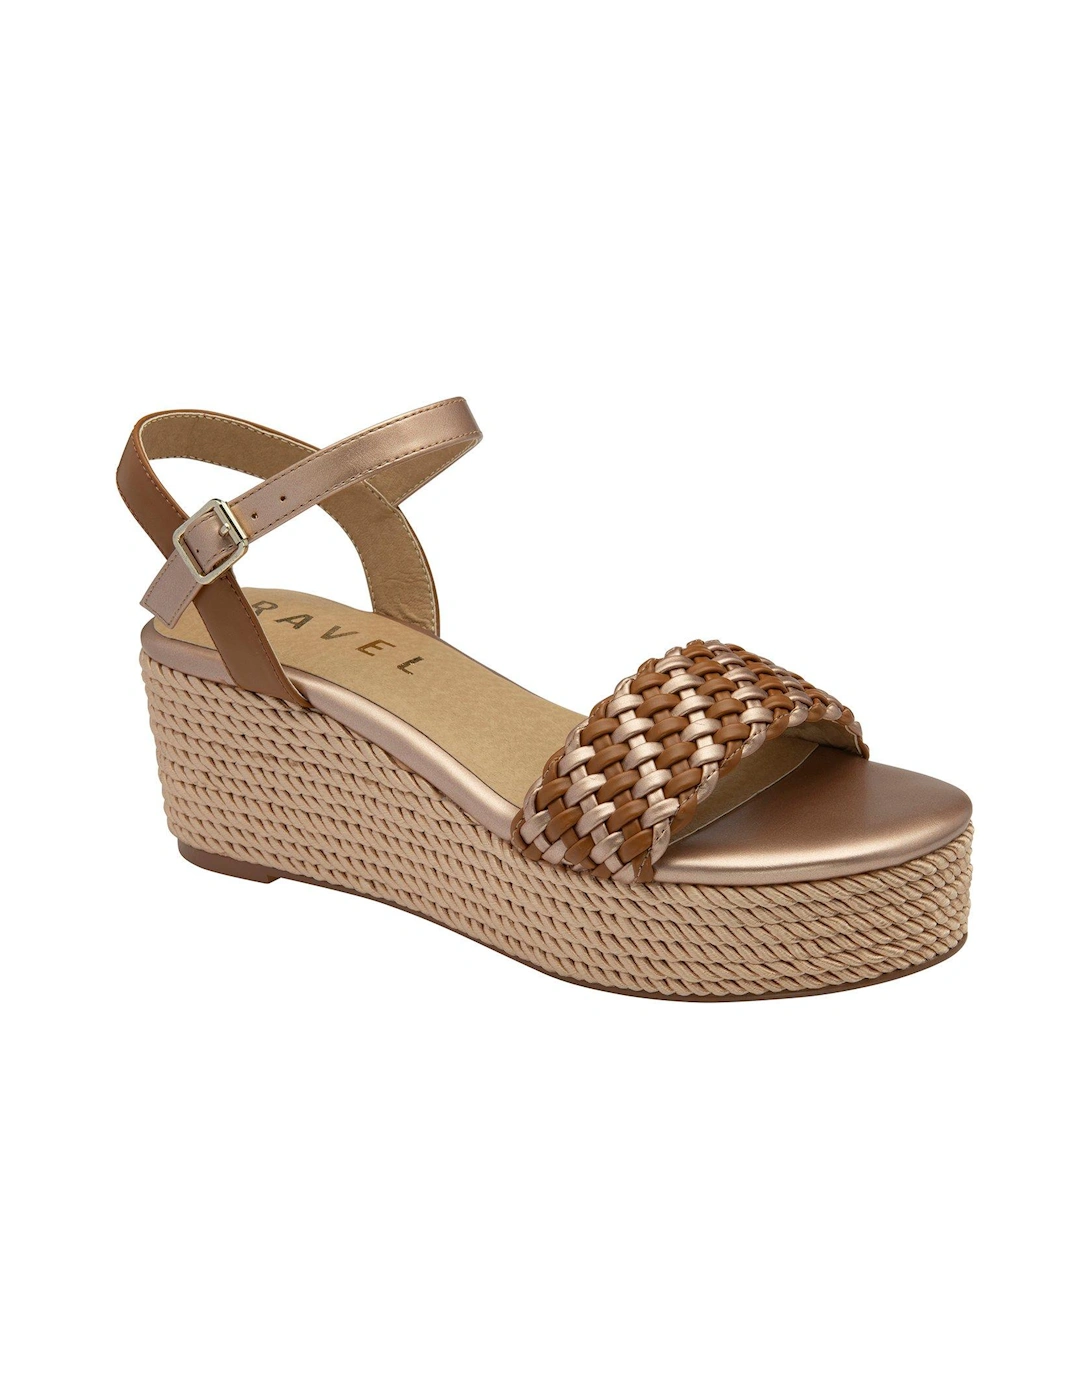 Kippen Woven Front Espadrille Wedged Sandals - Tan Multi, 2 of 1